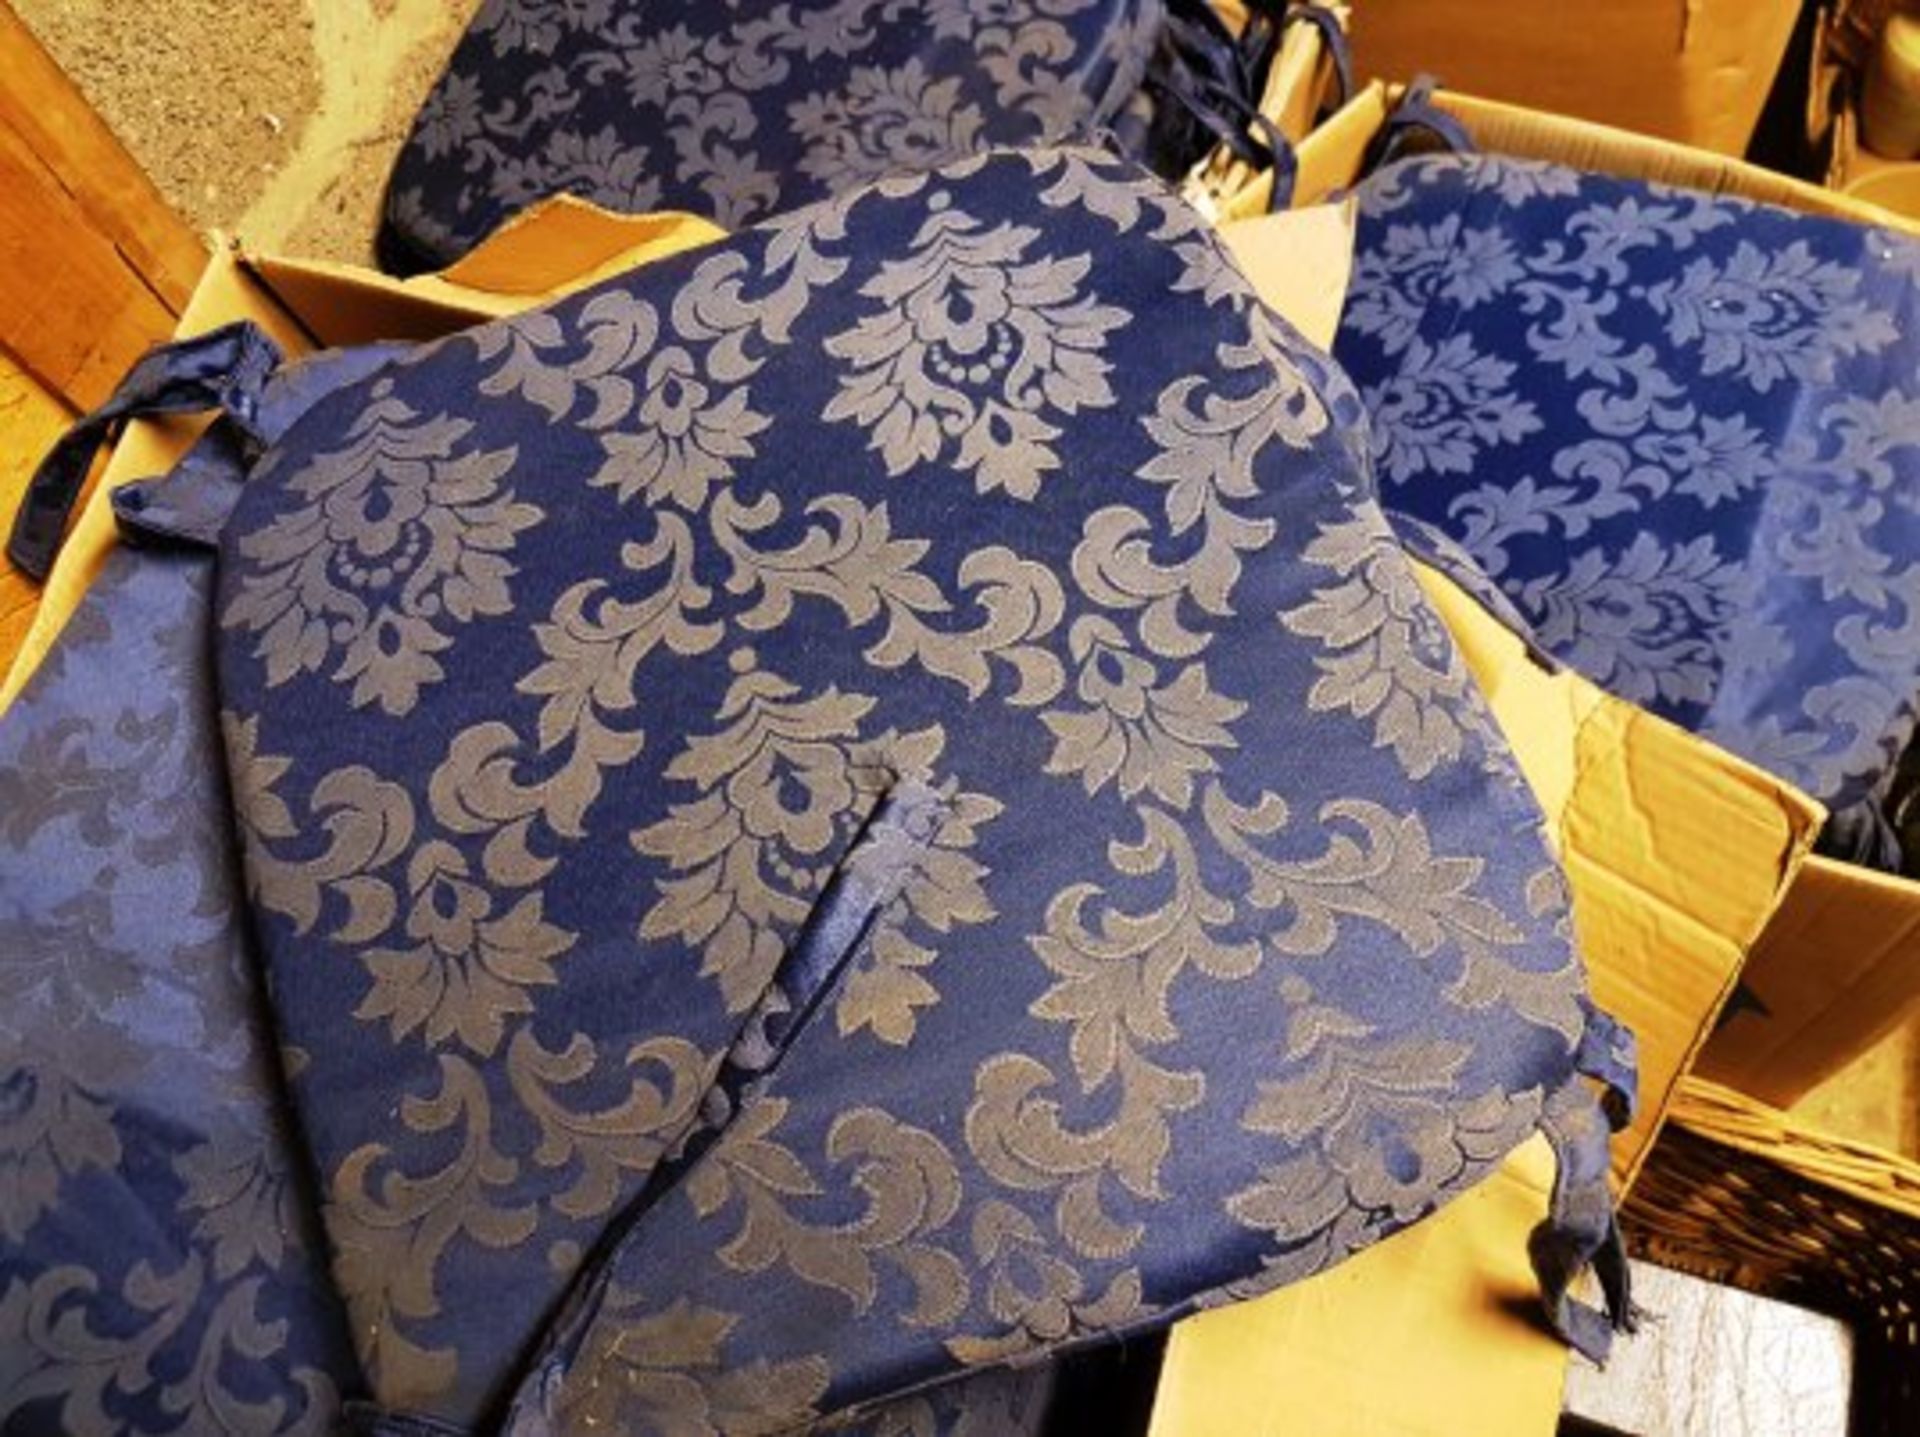 Fifty Plus Blue Cushions in 2 Boxes